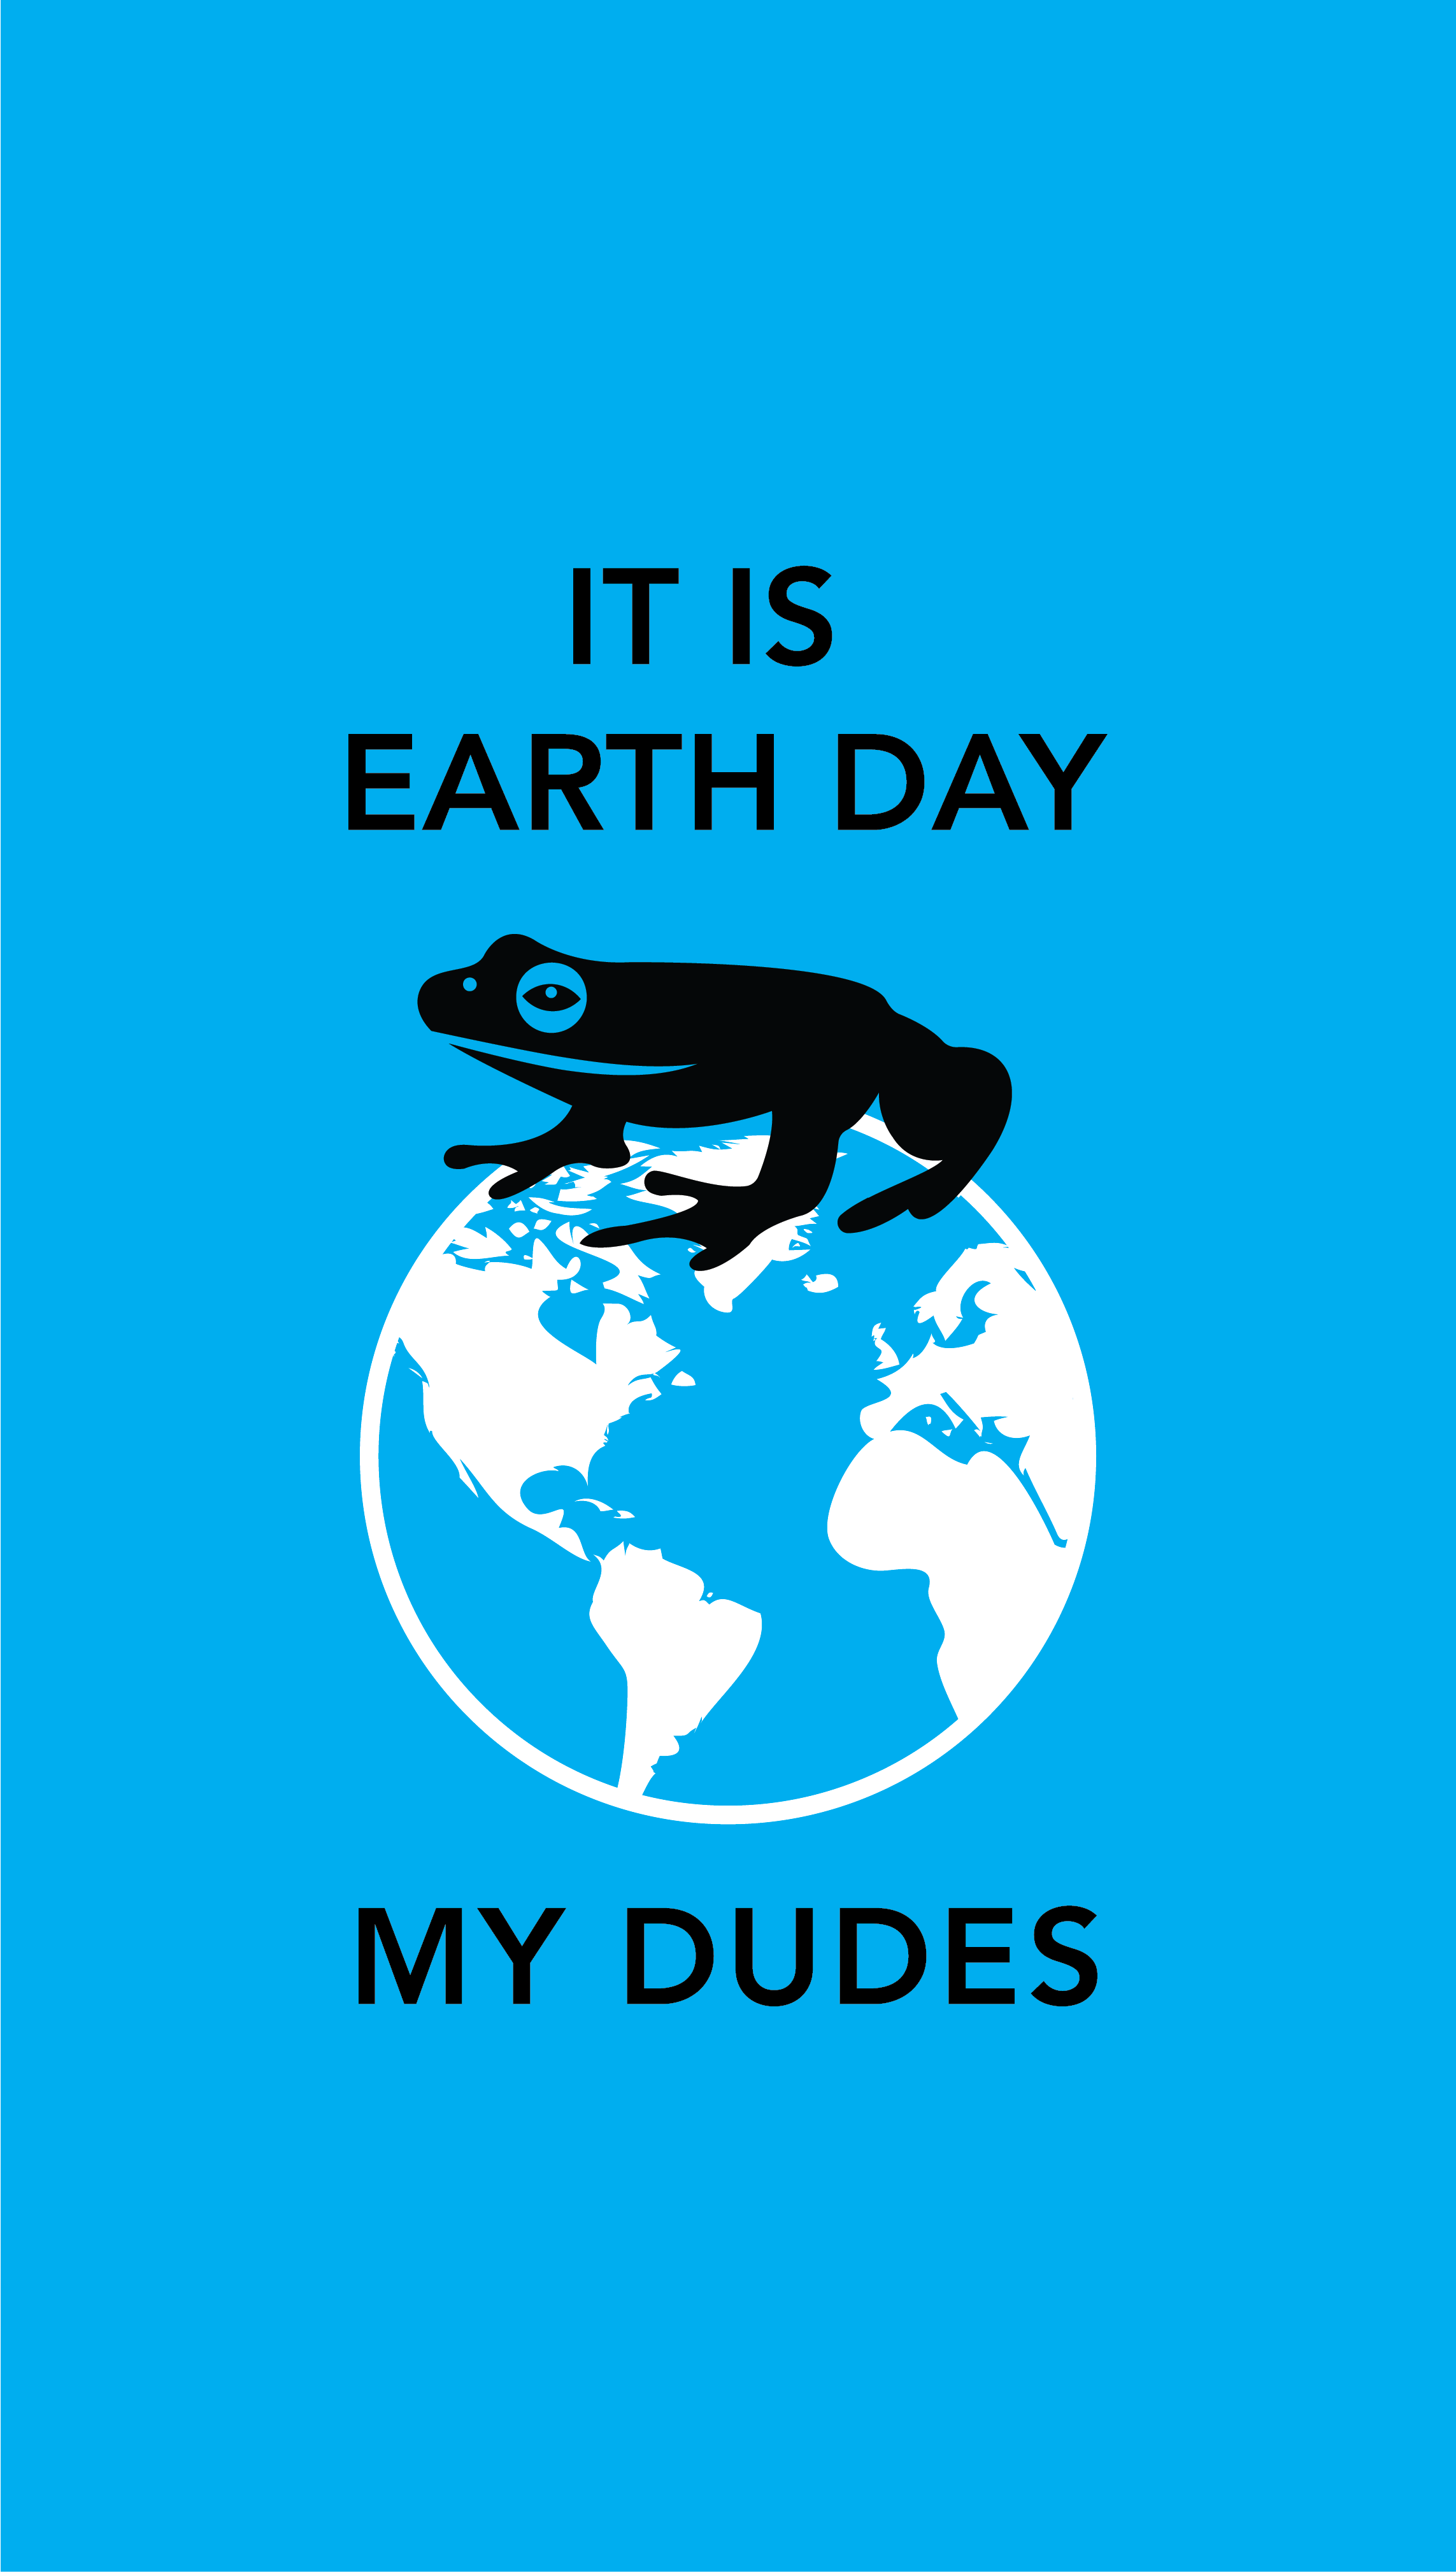 It is Earth Day my dudes